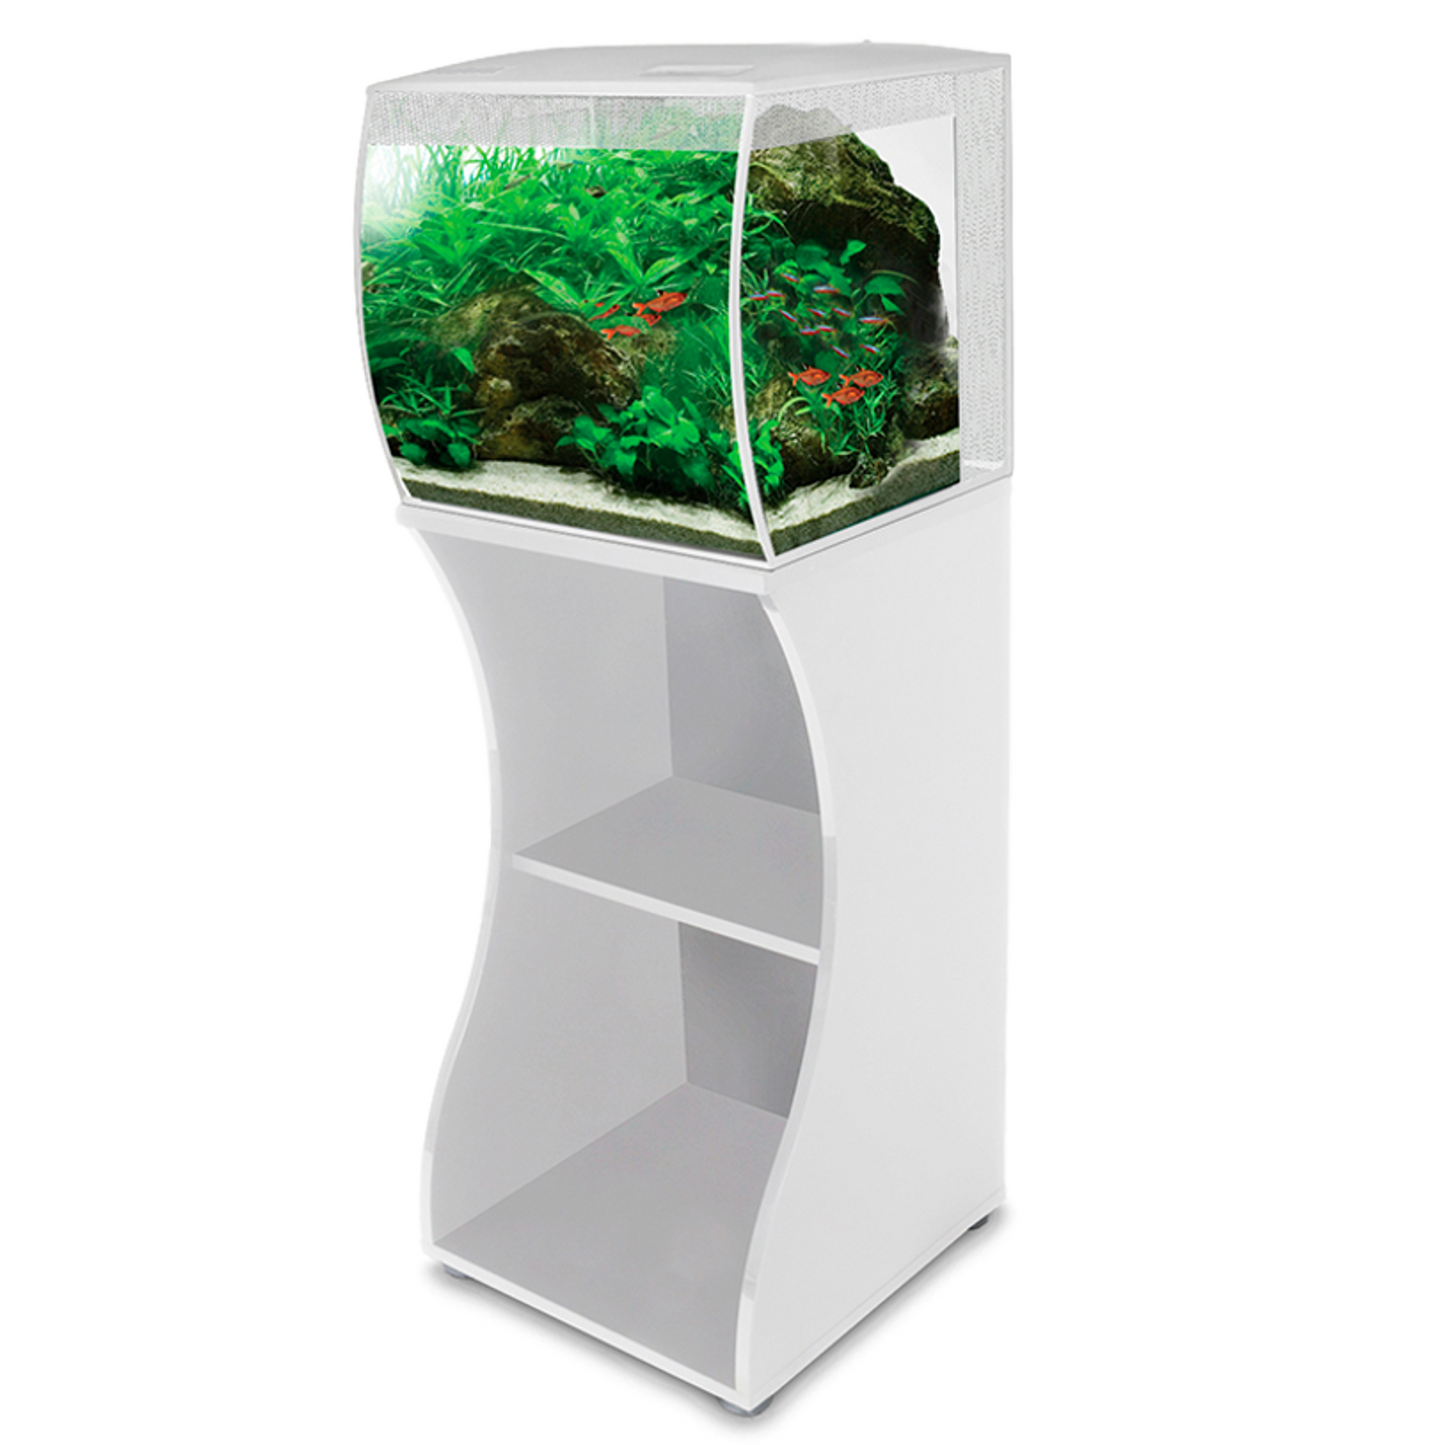 Fluval Flex LED Nano 57L with Stand - White Aquarium Tank with Integral Filter and Remote Control